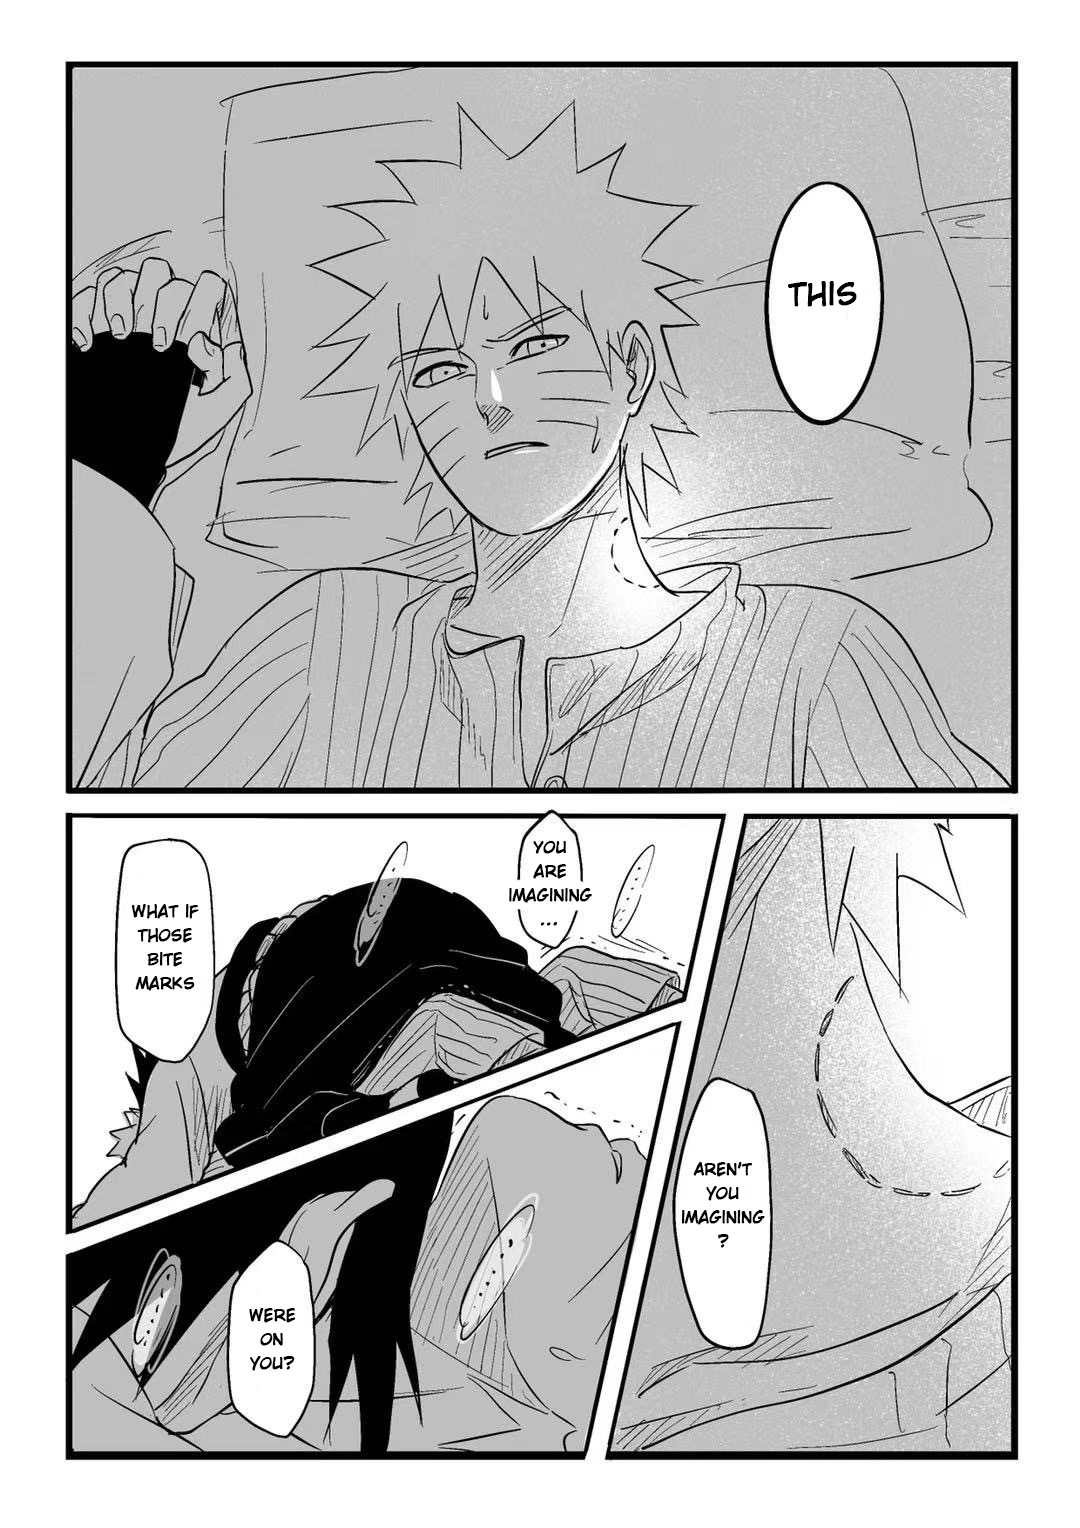 doujinshi] My Lost Himawari - Chapter 12 - SouthNorthSound - Naruto [Archive  of Our Own]